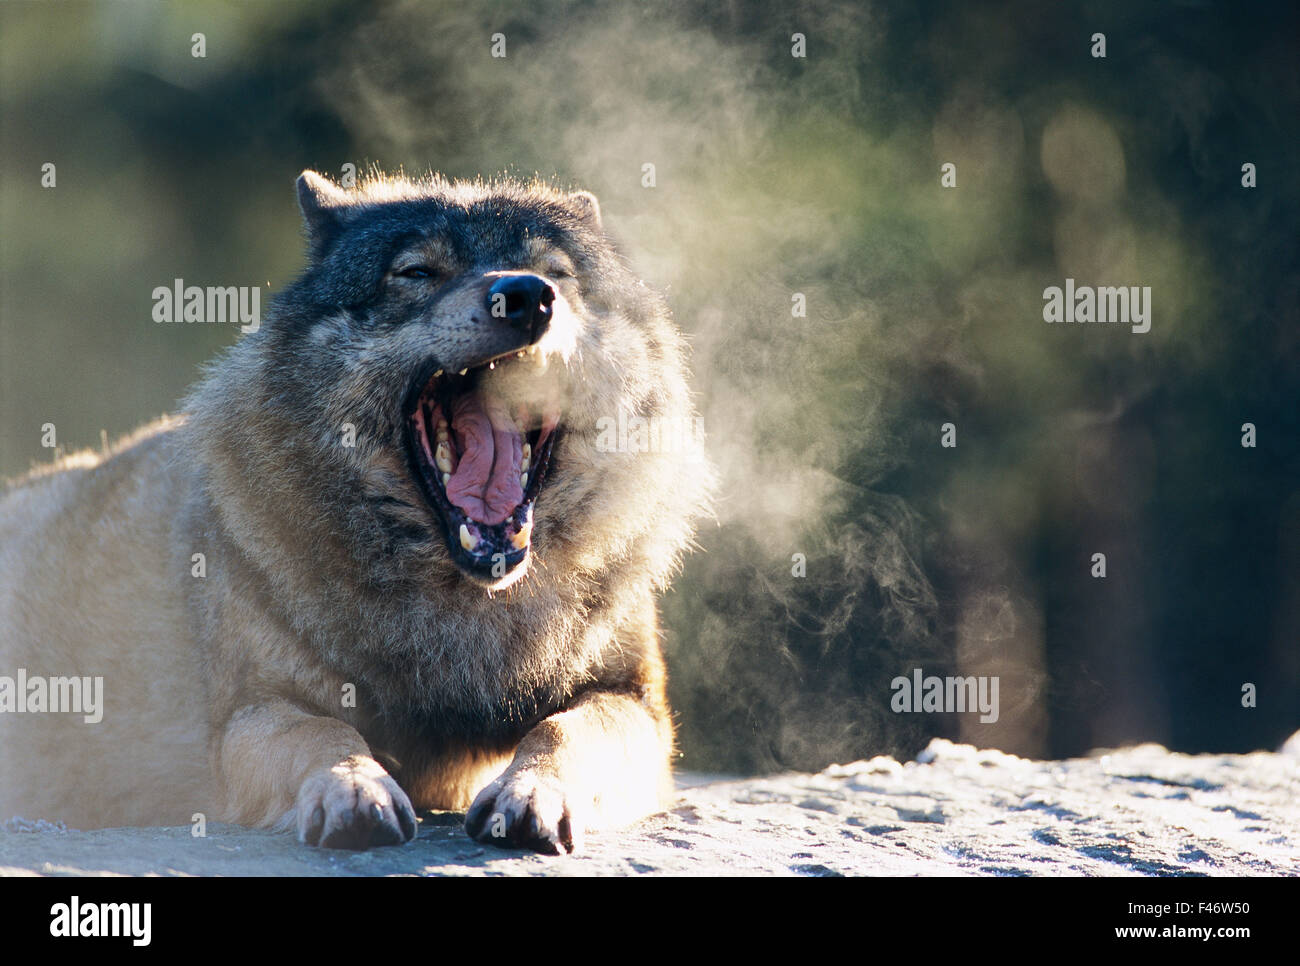 A wolf. Stock Photo